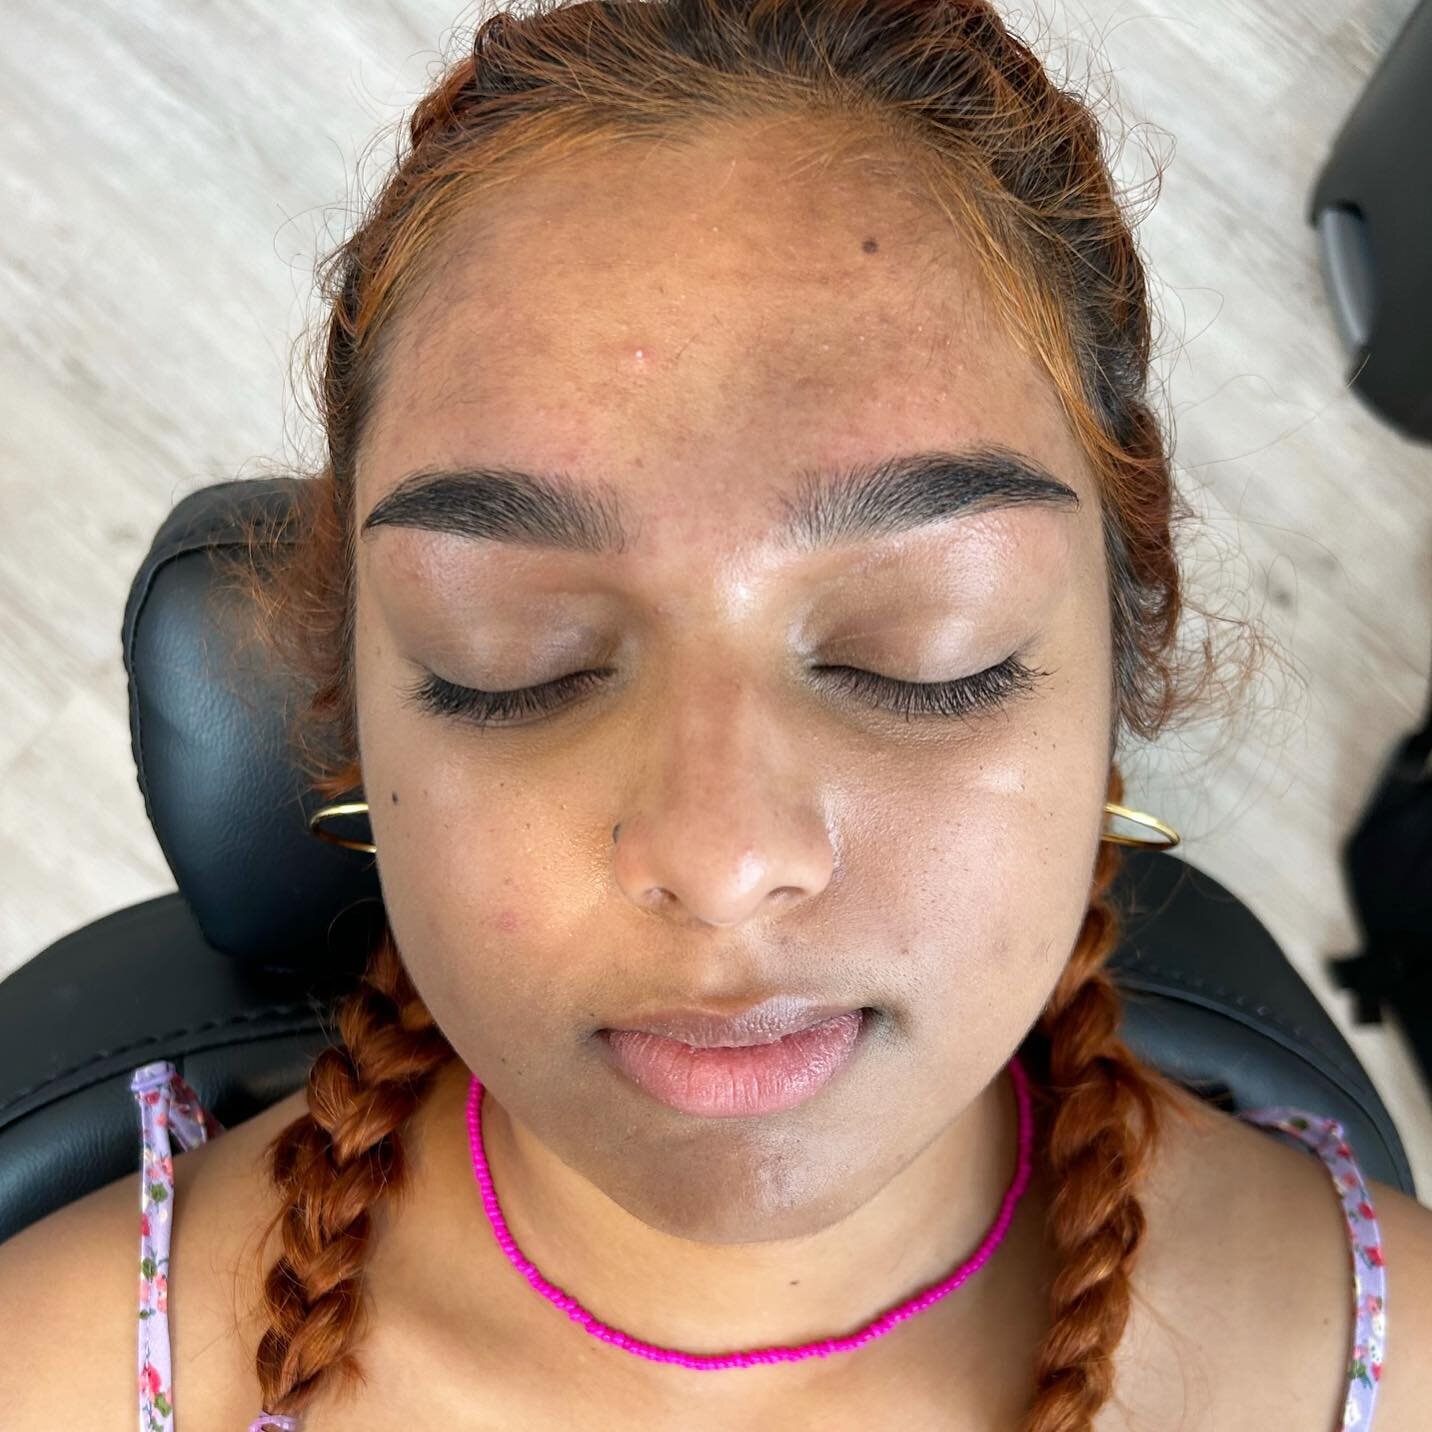 Every pair of brows is a potential work of art, and the first brush stroke is a meticulous blueprint. At Brooke Sarah Artistry, we ensure each brow is thoughtfully mapped out before we start the waxing process. Taking into account your unique facial 